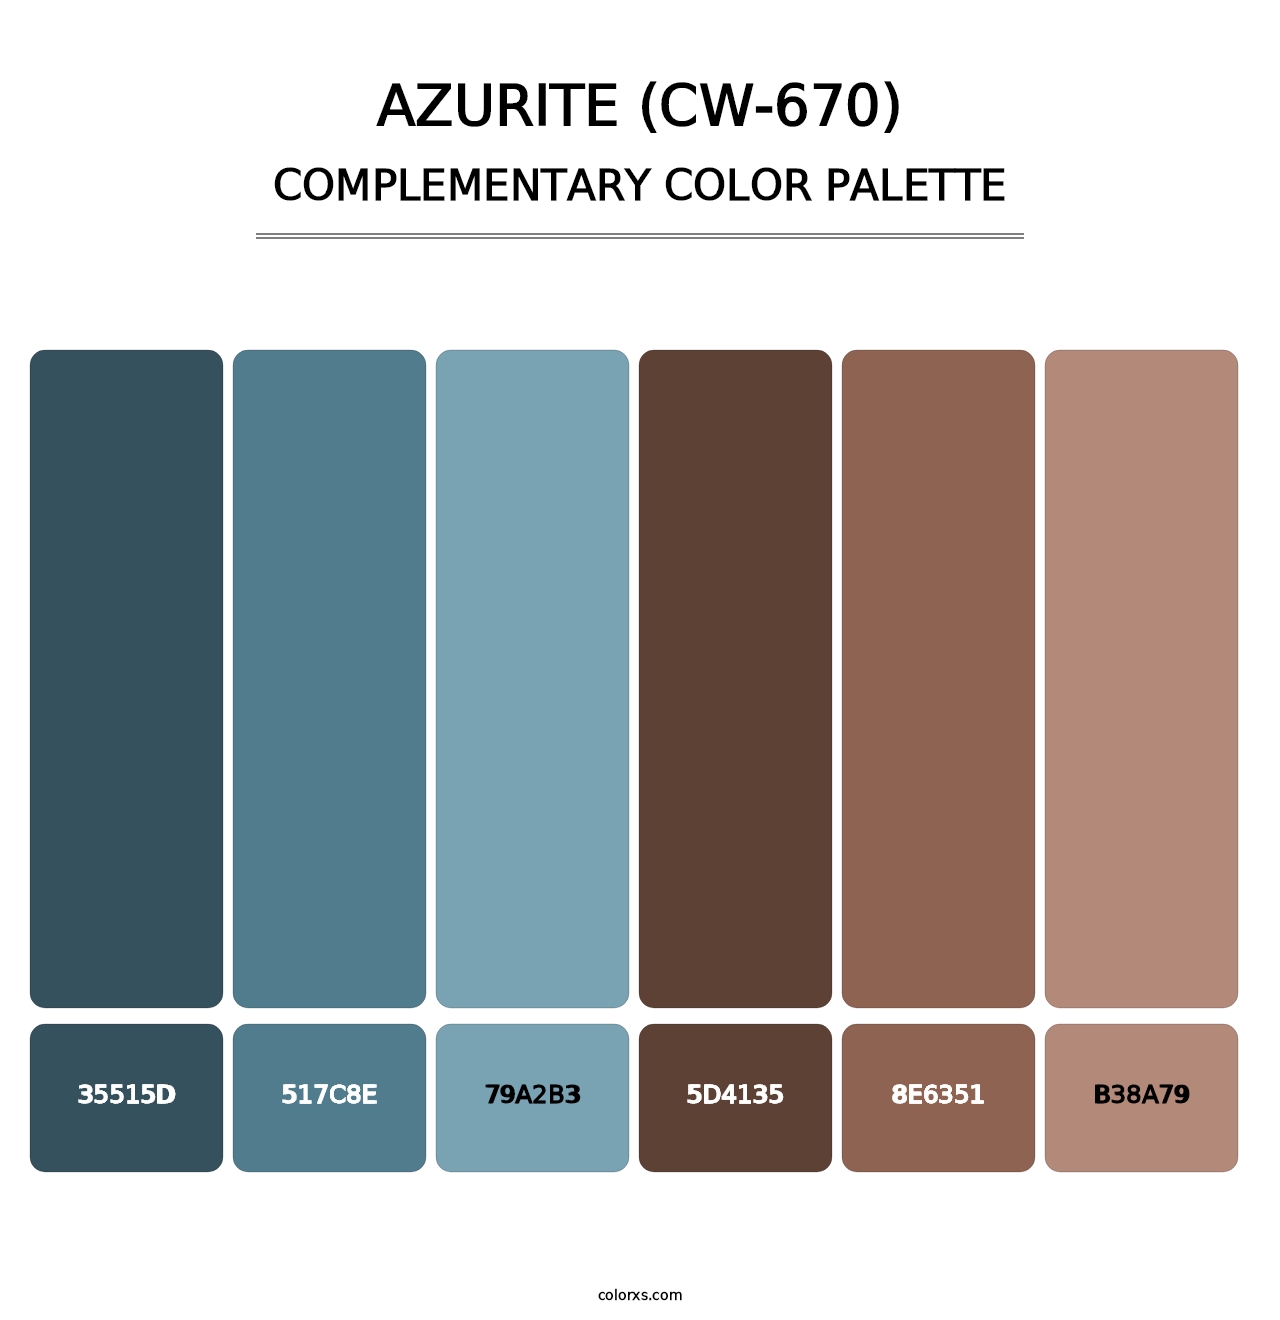 Azurite (CW-670) - Complementary Color Palette